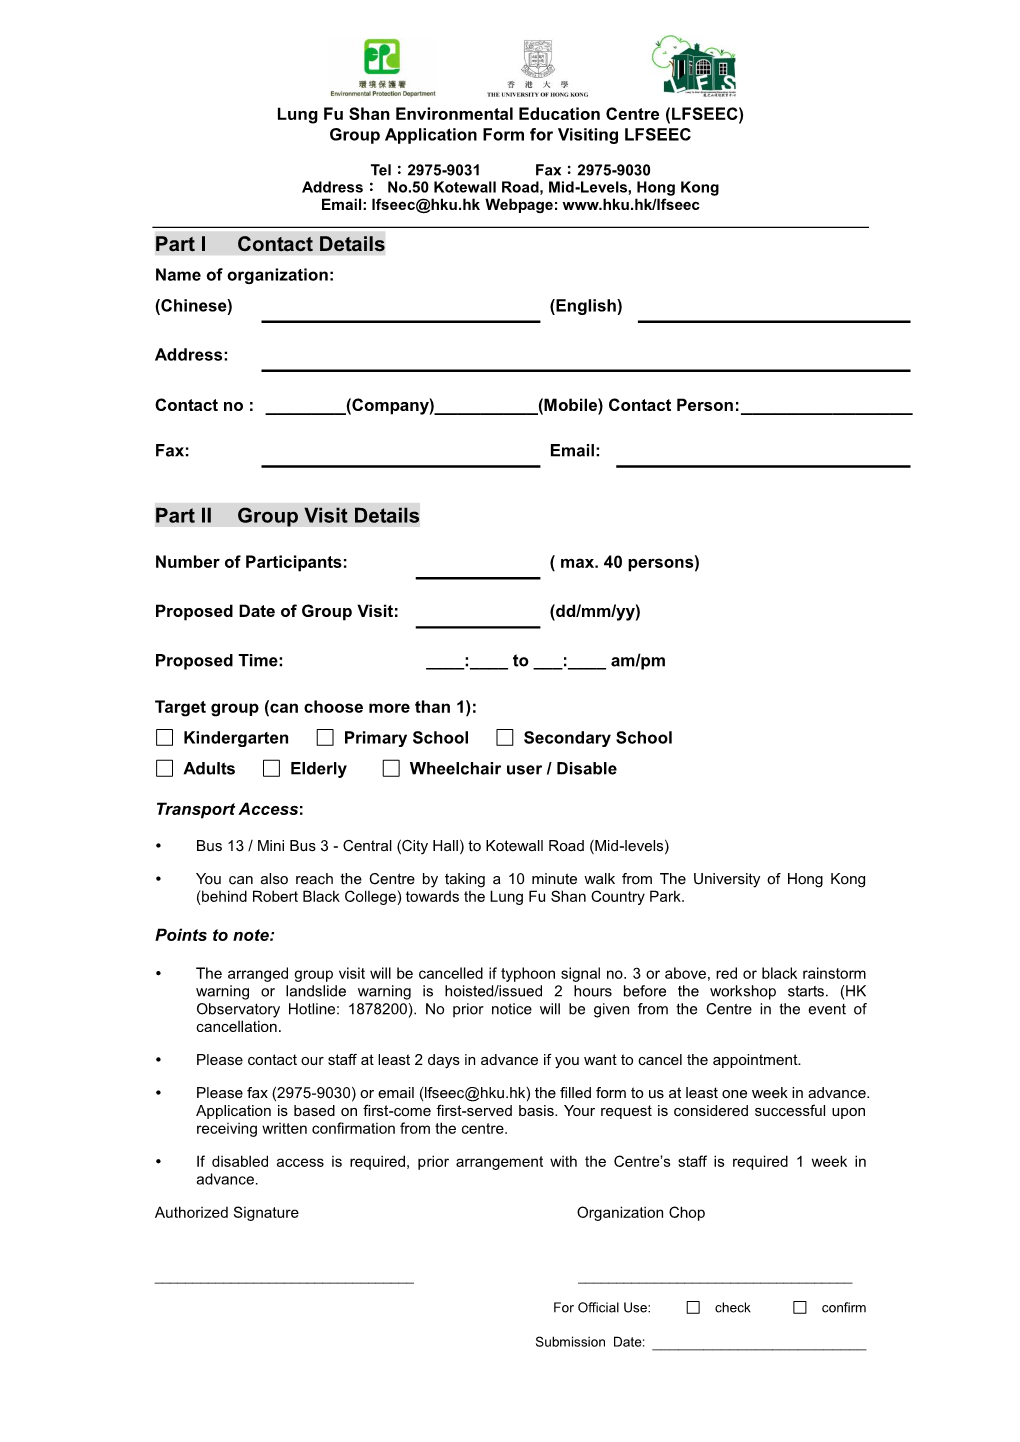 Lung Fu Shan Environmental Education Centre (LFSEEC) Group Application Form for Visiting LFSEEC